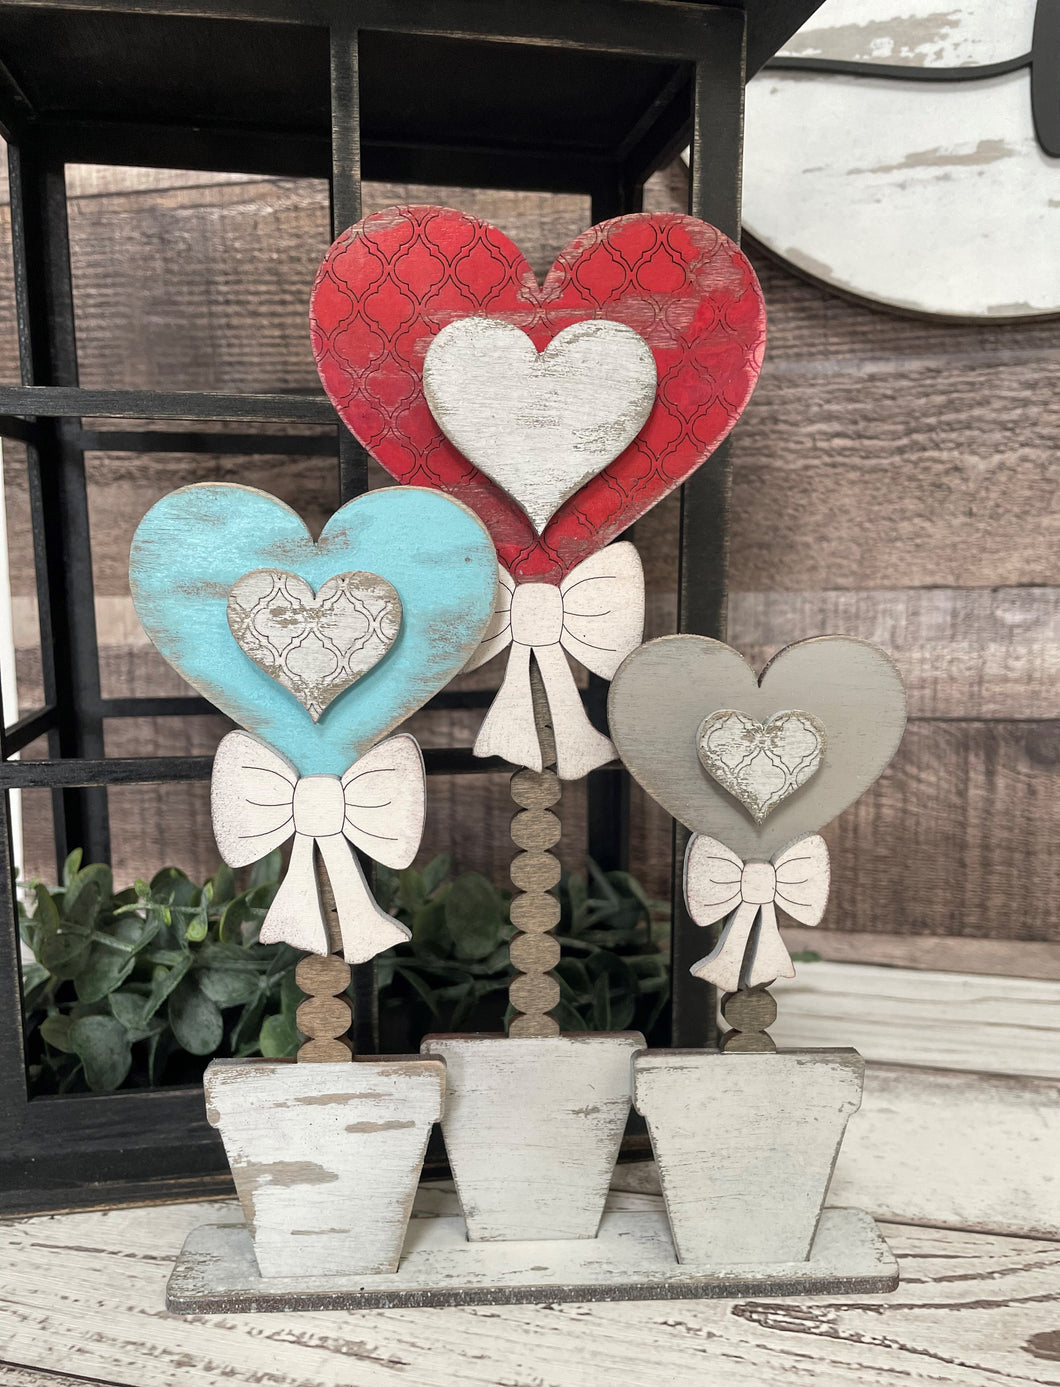 Potted hearts